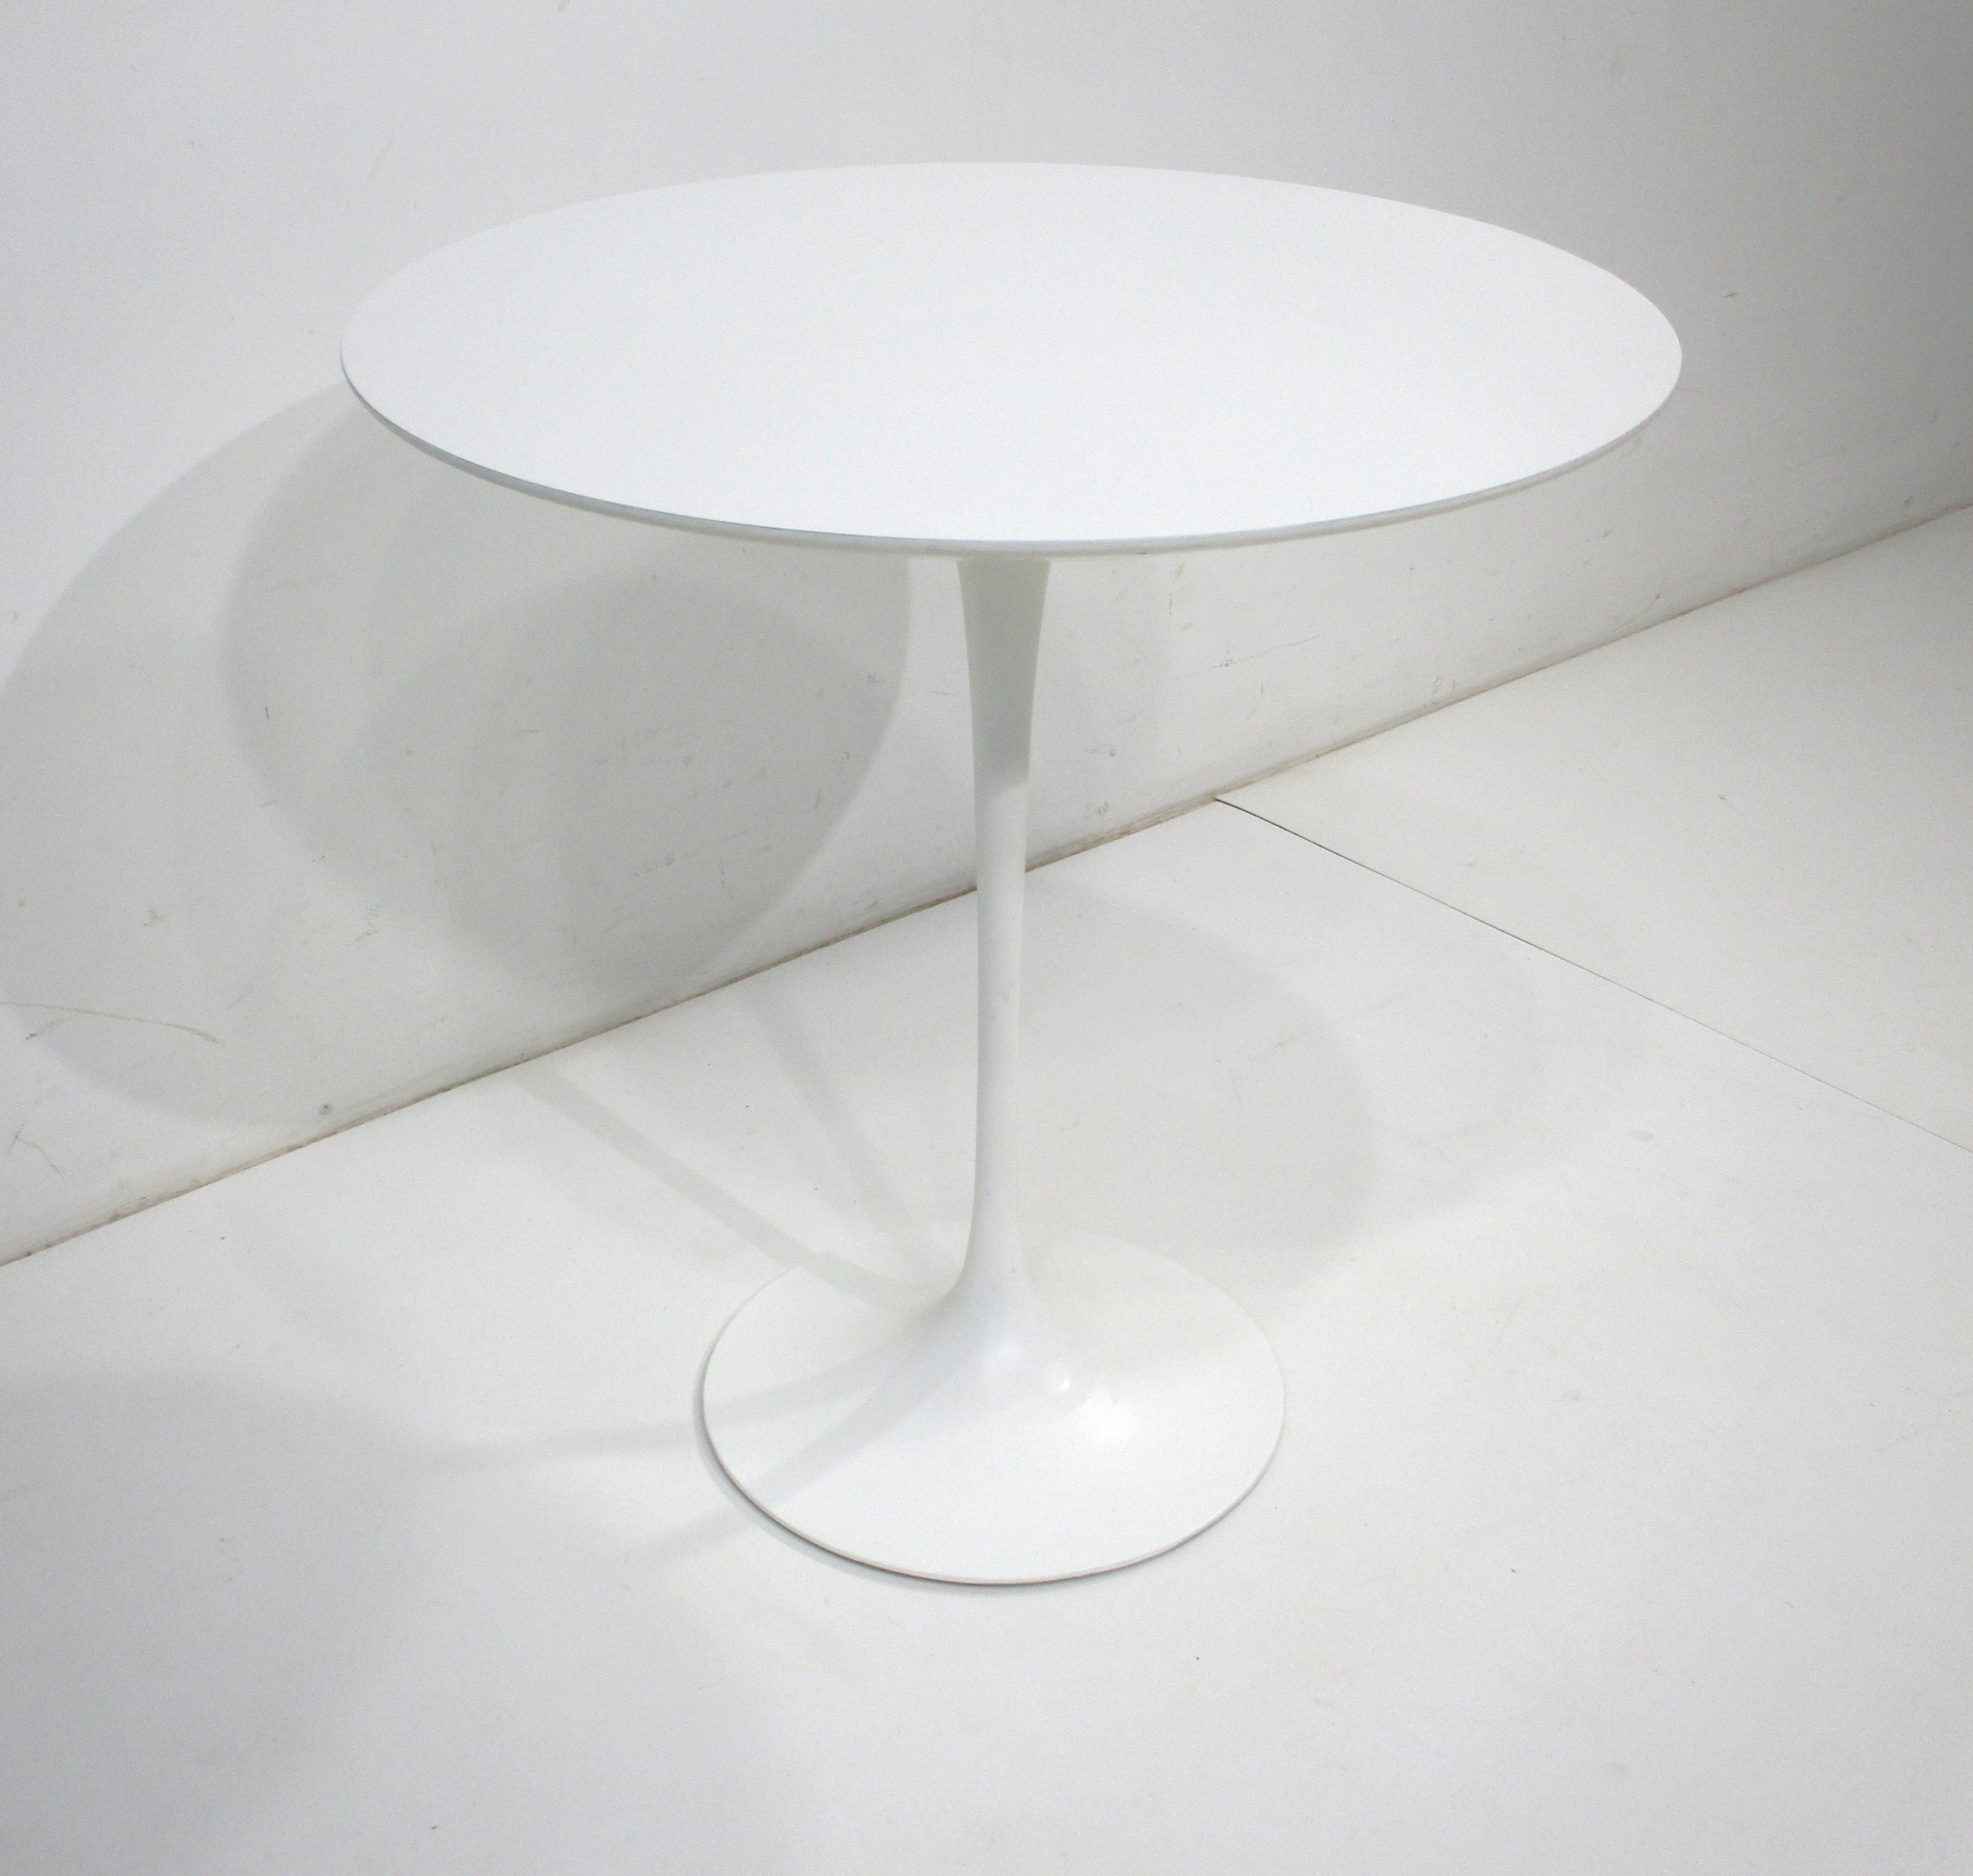 A very fine sculptural tulip side table with a bigger sized 20